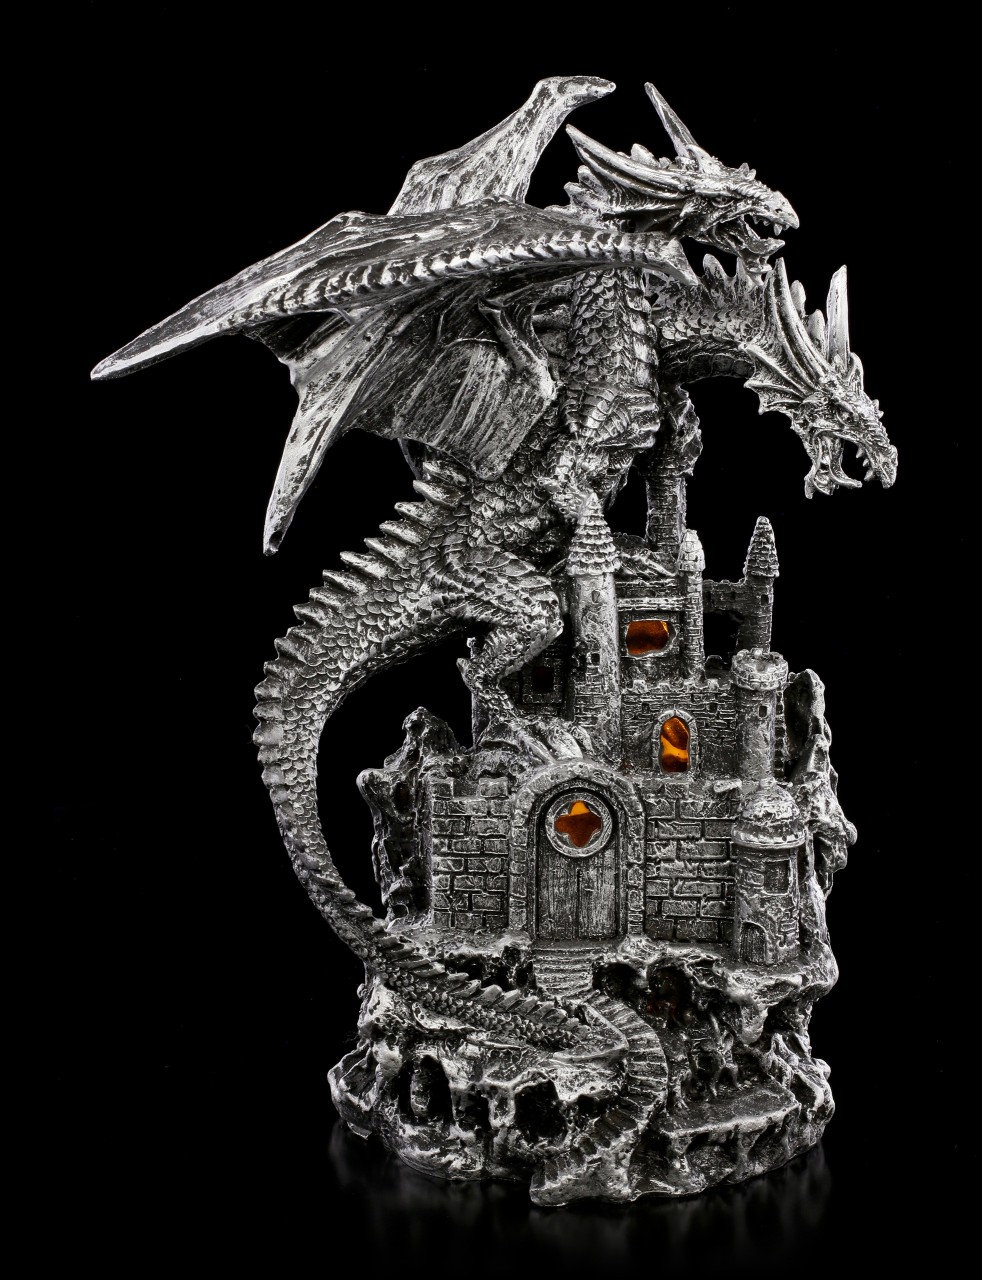 Two-Headed Dragon Figurine with LED